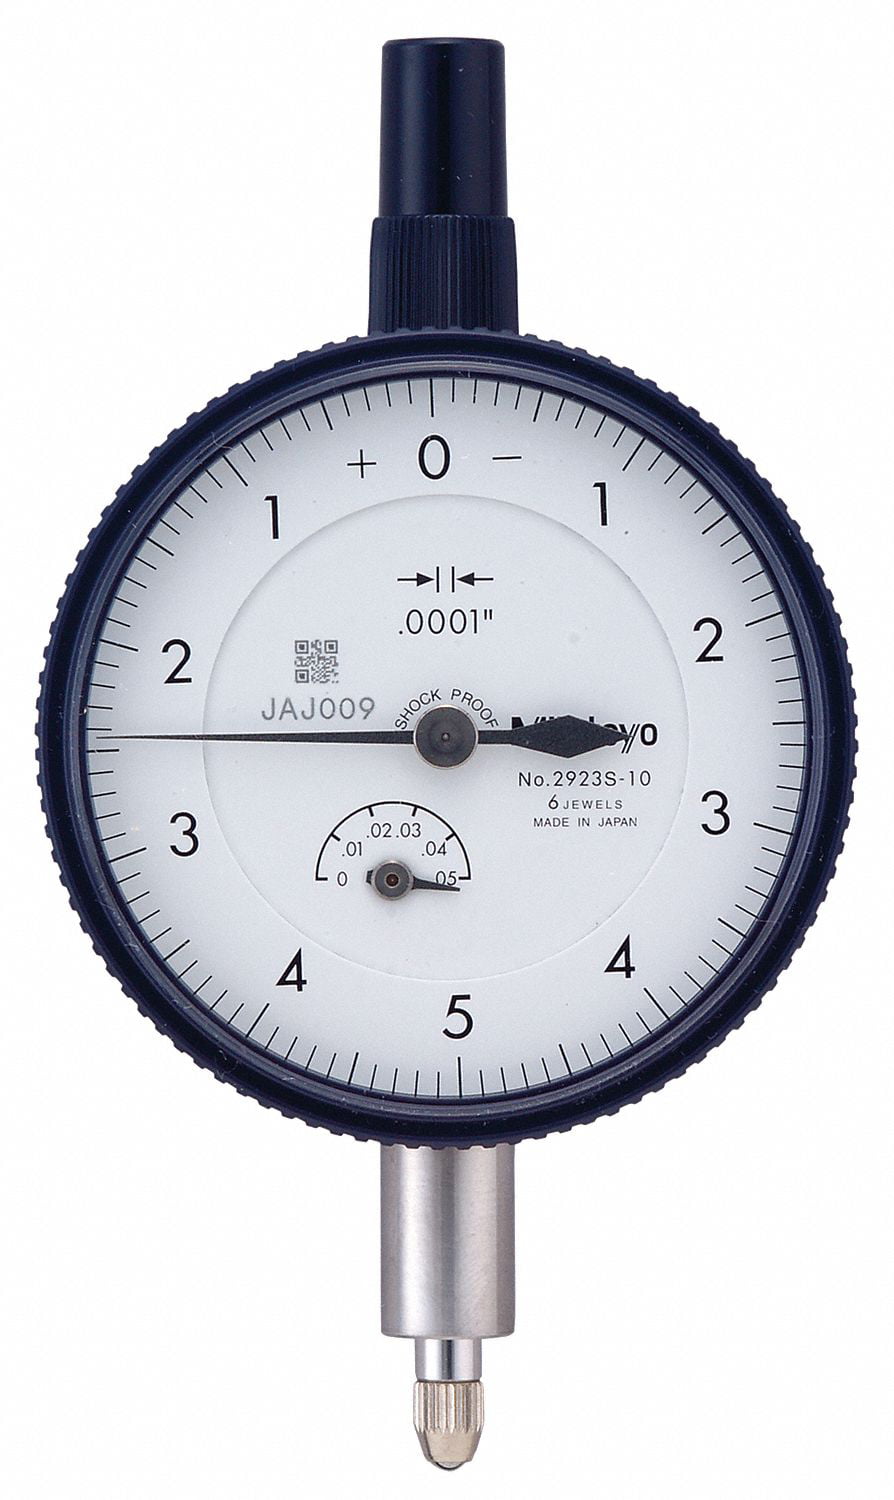 Mitutoyo 51340310E Dial Test Indicator for sale online 